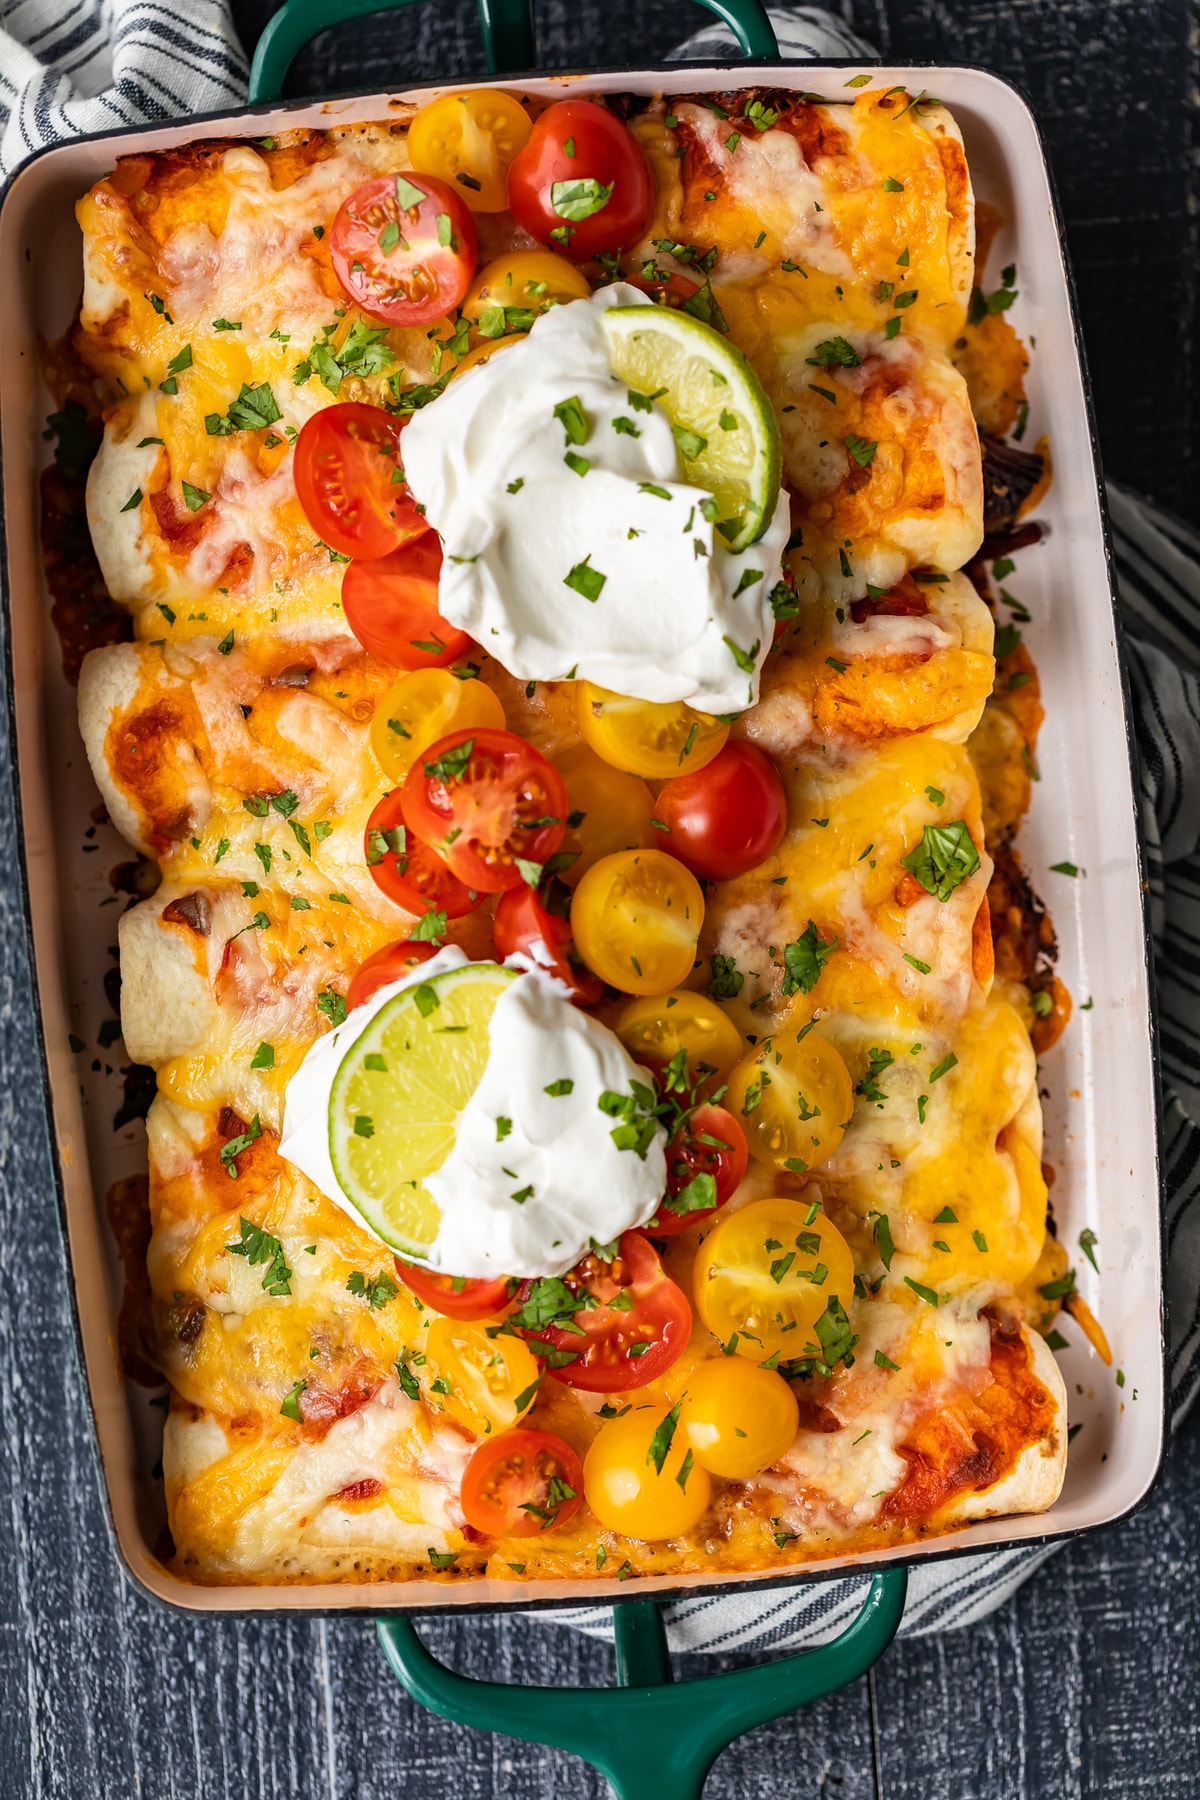 shredded beef enchiladas topped with sour cream, tomatoes, cheese, and cilantro